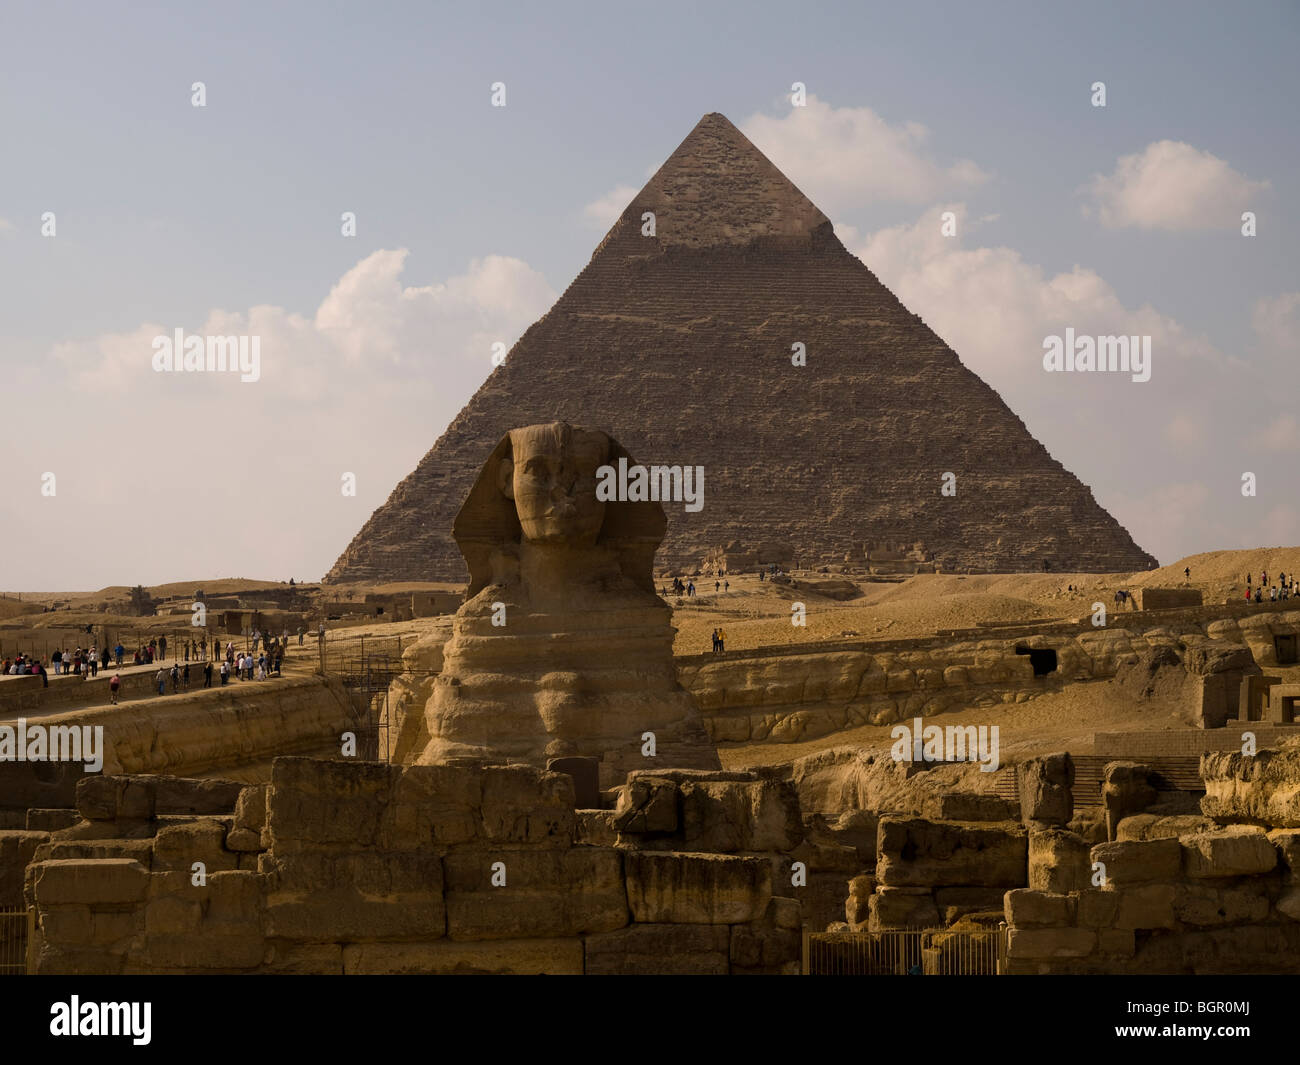 The Sphinx, sun god, worshipped in Ancient Egypt by the pharoahs. Stock Photo